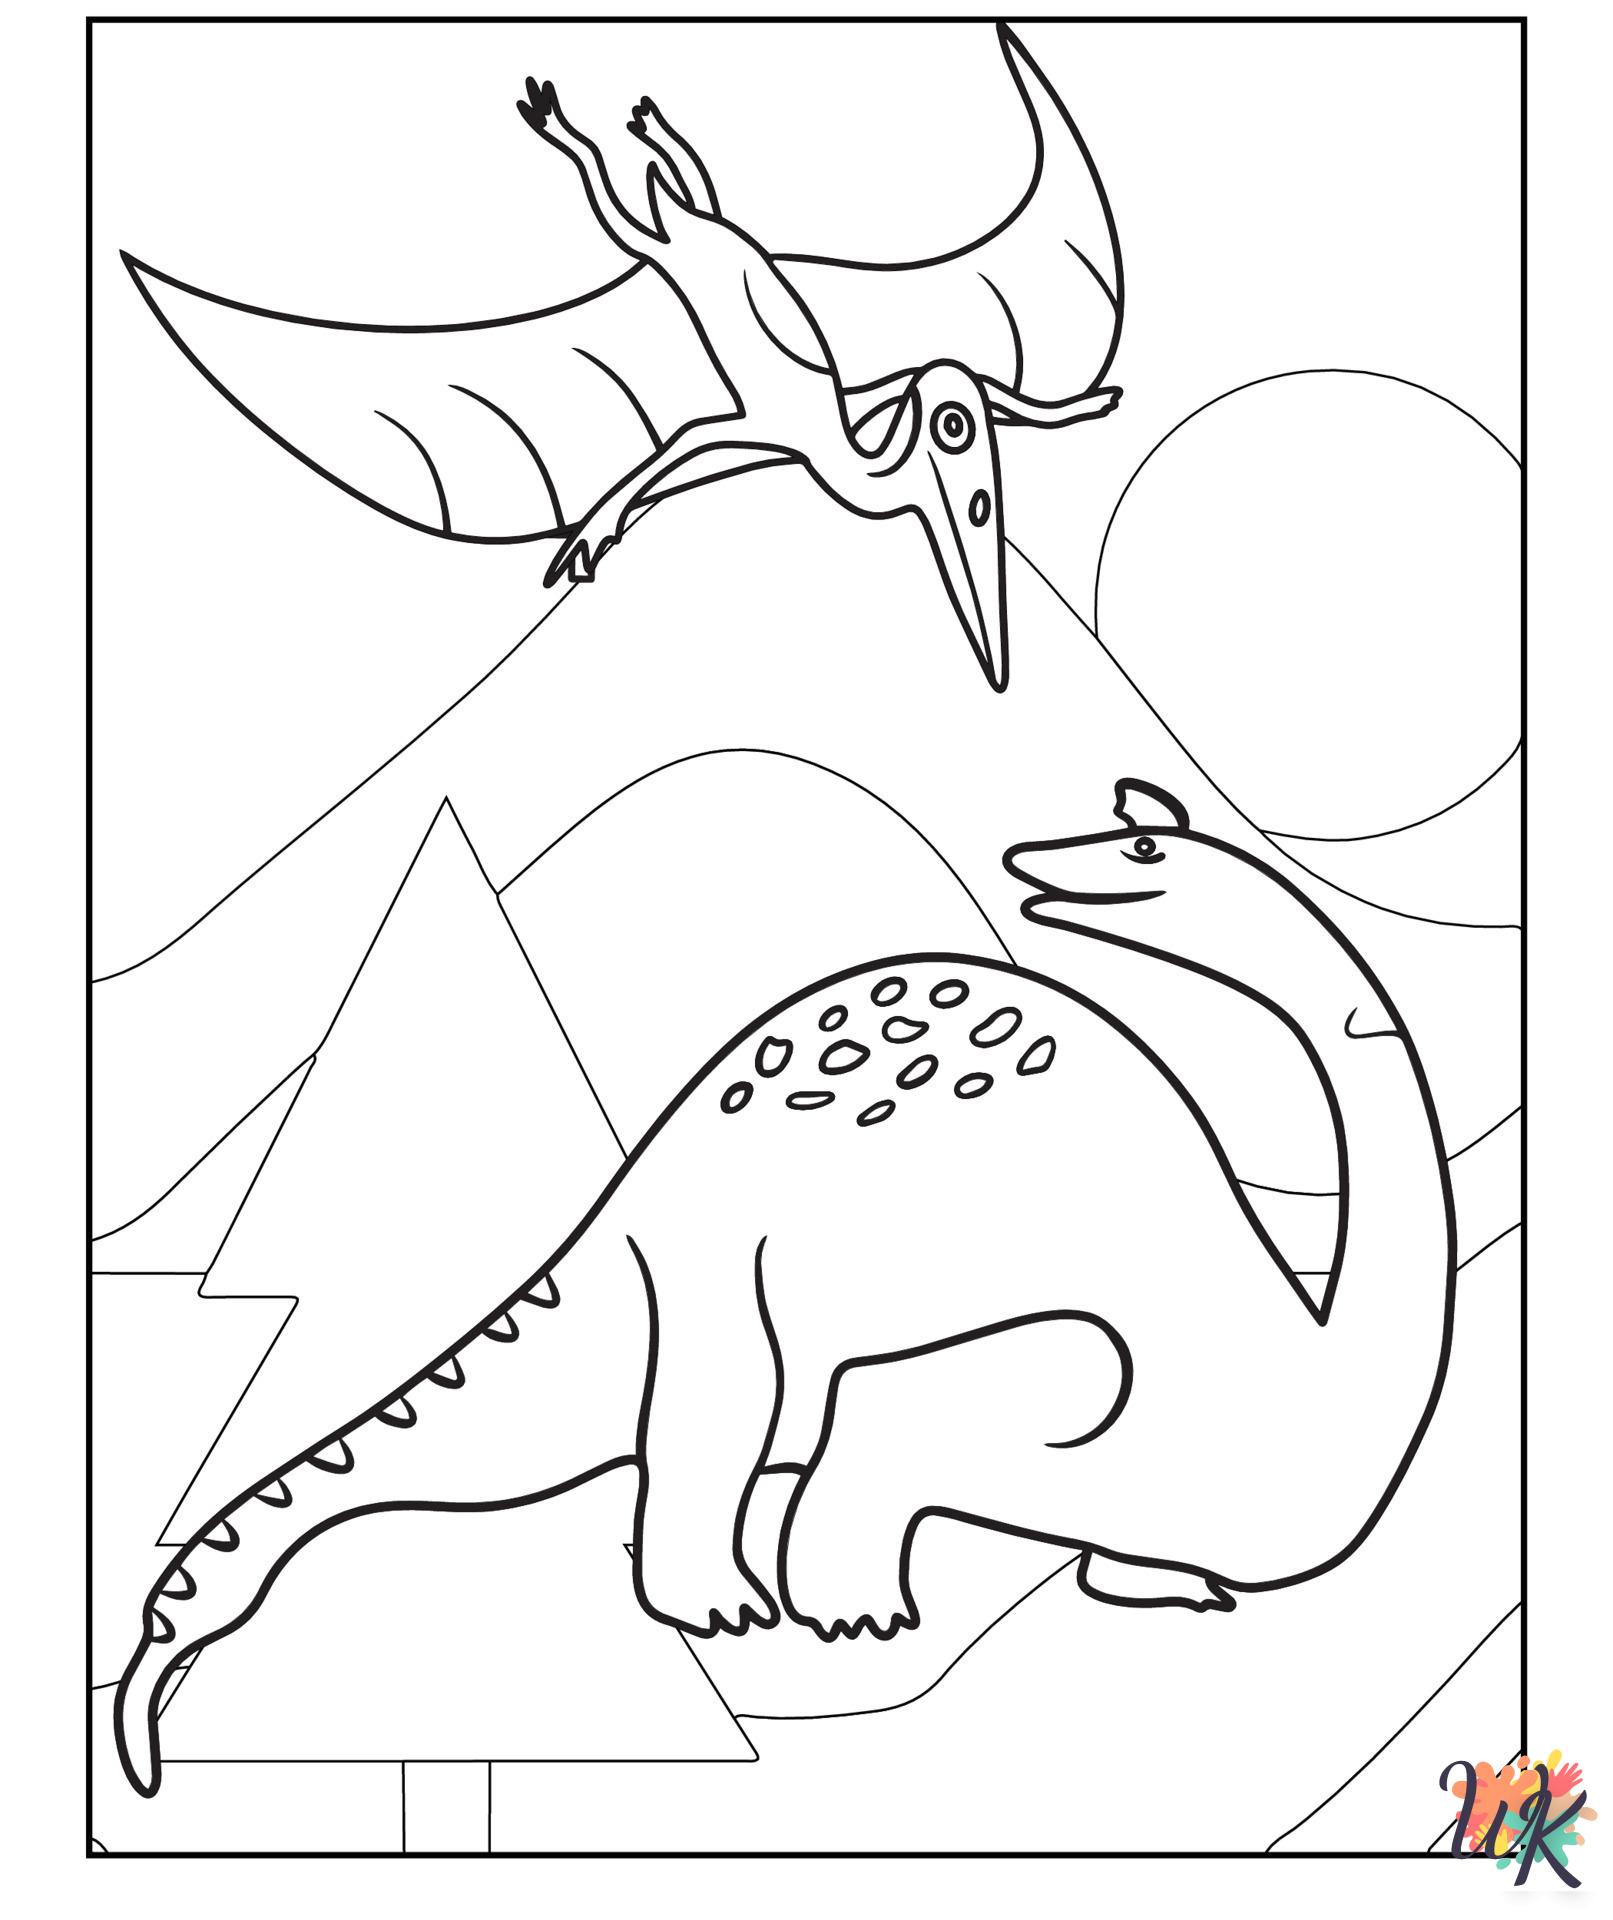 Jurassic Park free coloring pages